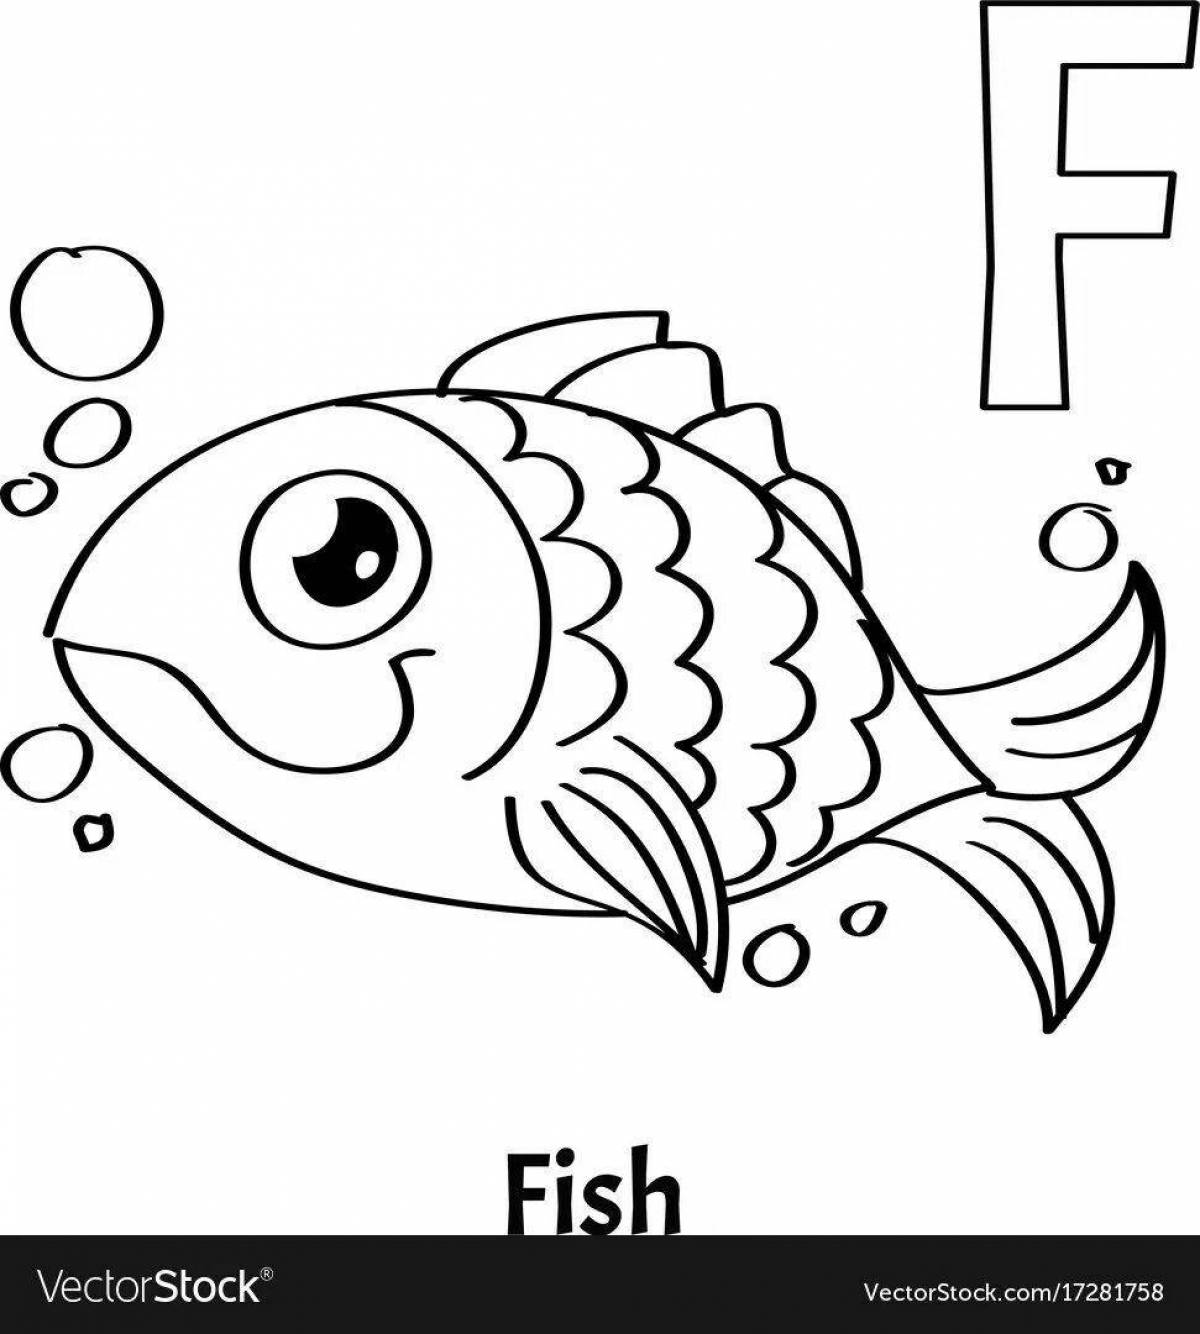 Coloring page joyful letter f